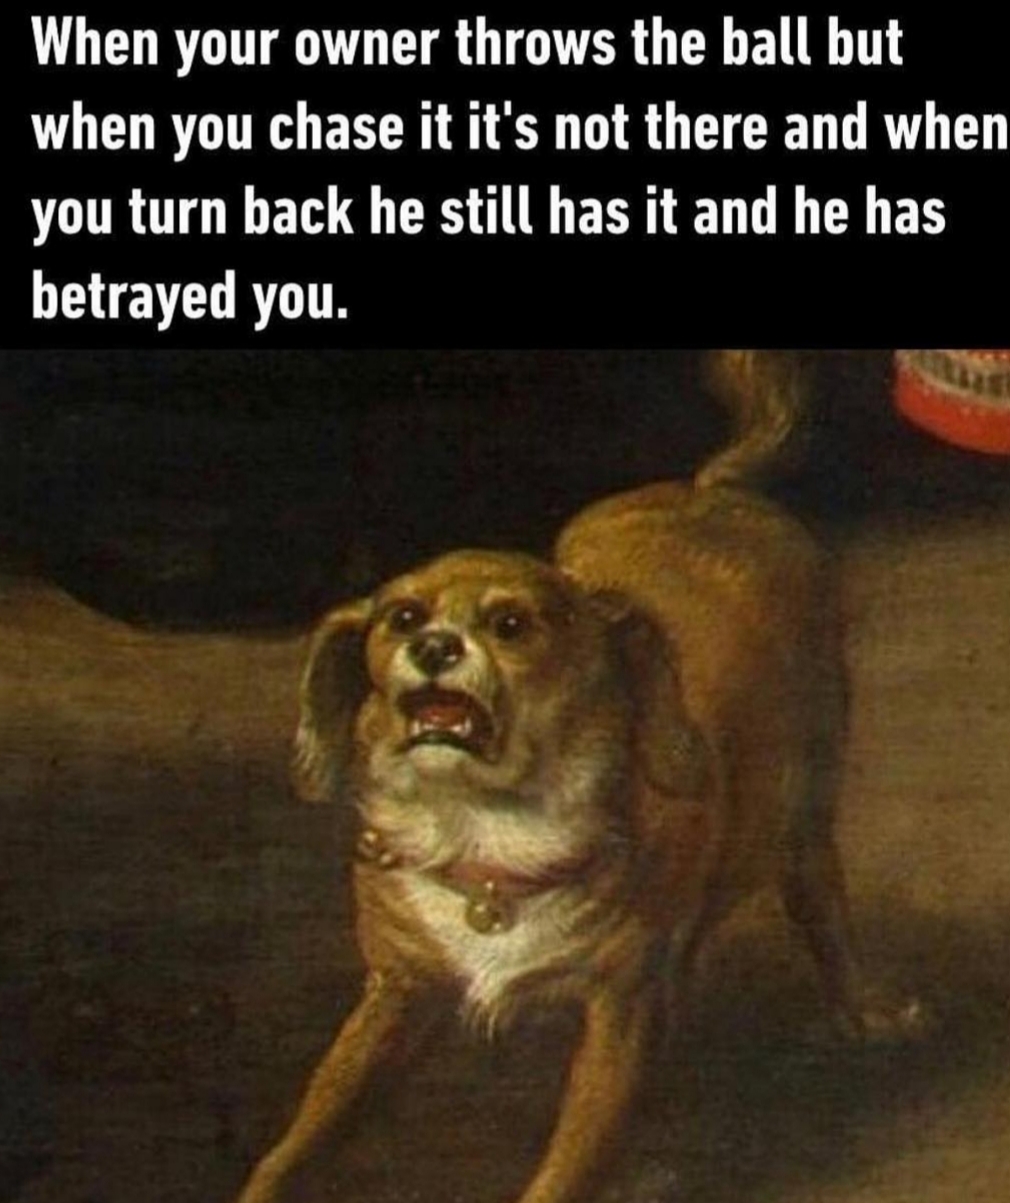 classical art memes animals - When your owner throws the ball but when you chase it it's not there and when you turn back he still has it and he has betrayed you.